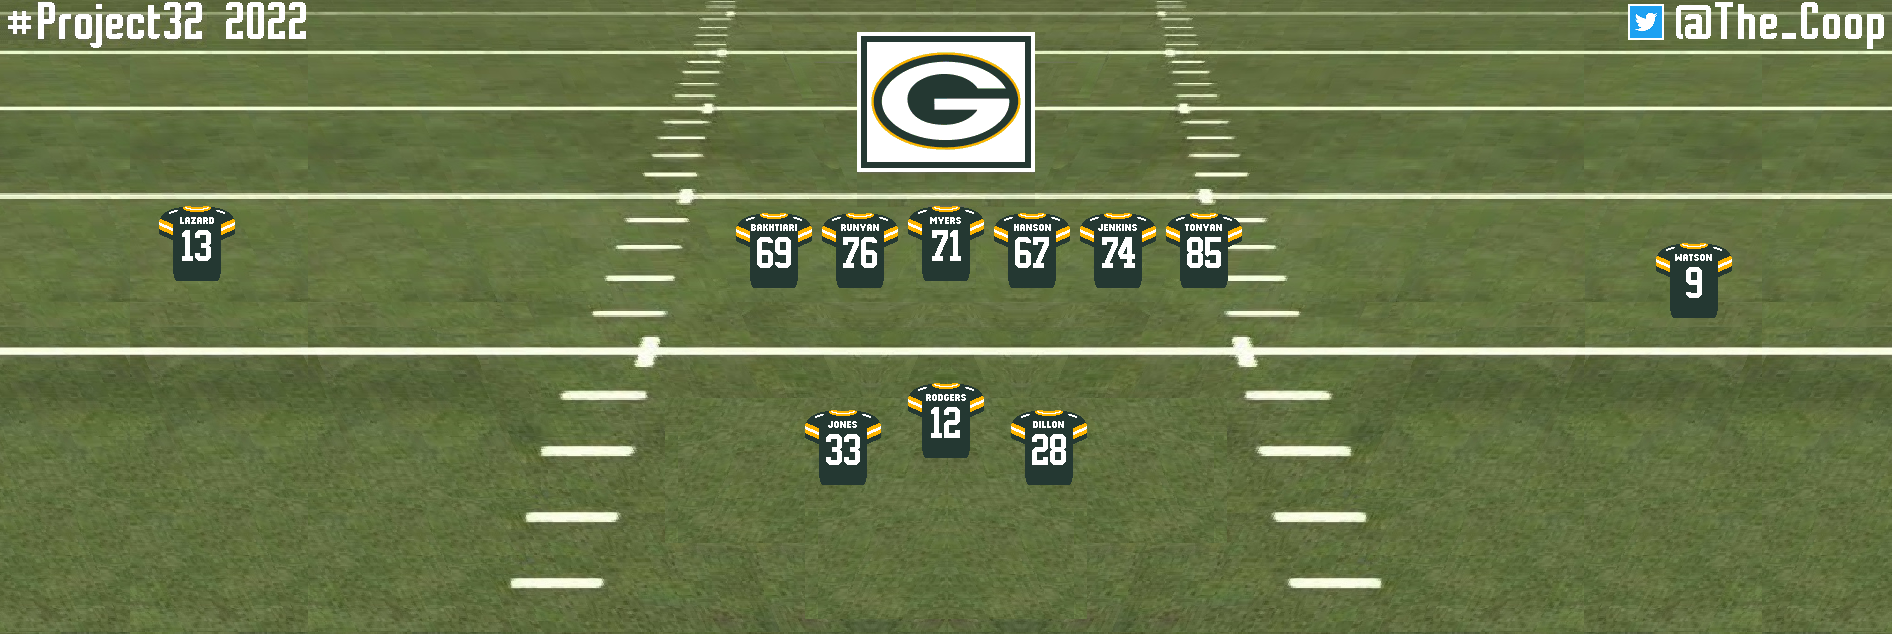 Green Bay Packers 2022 Projections